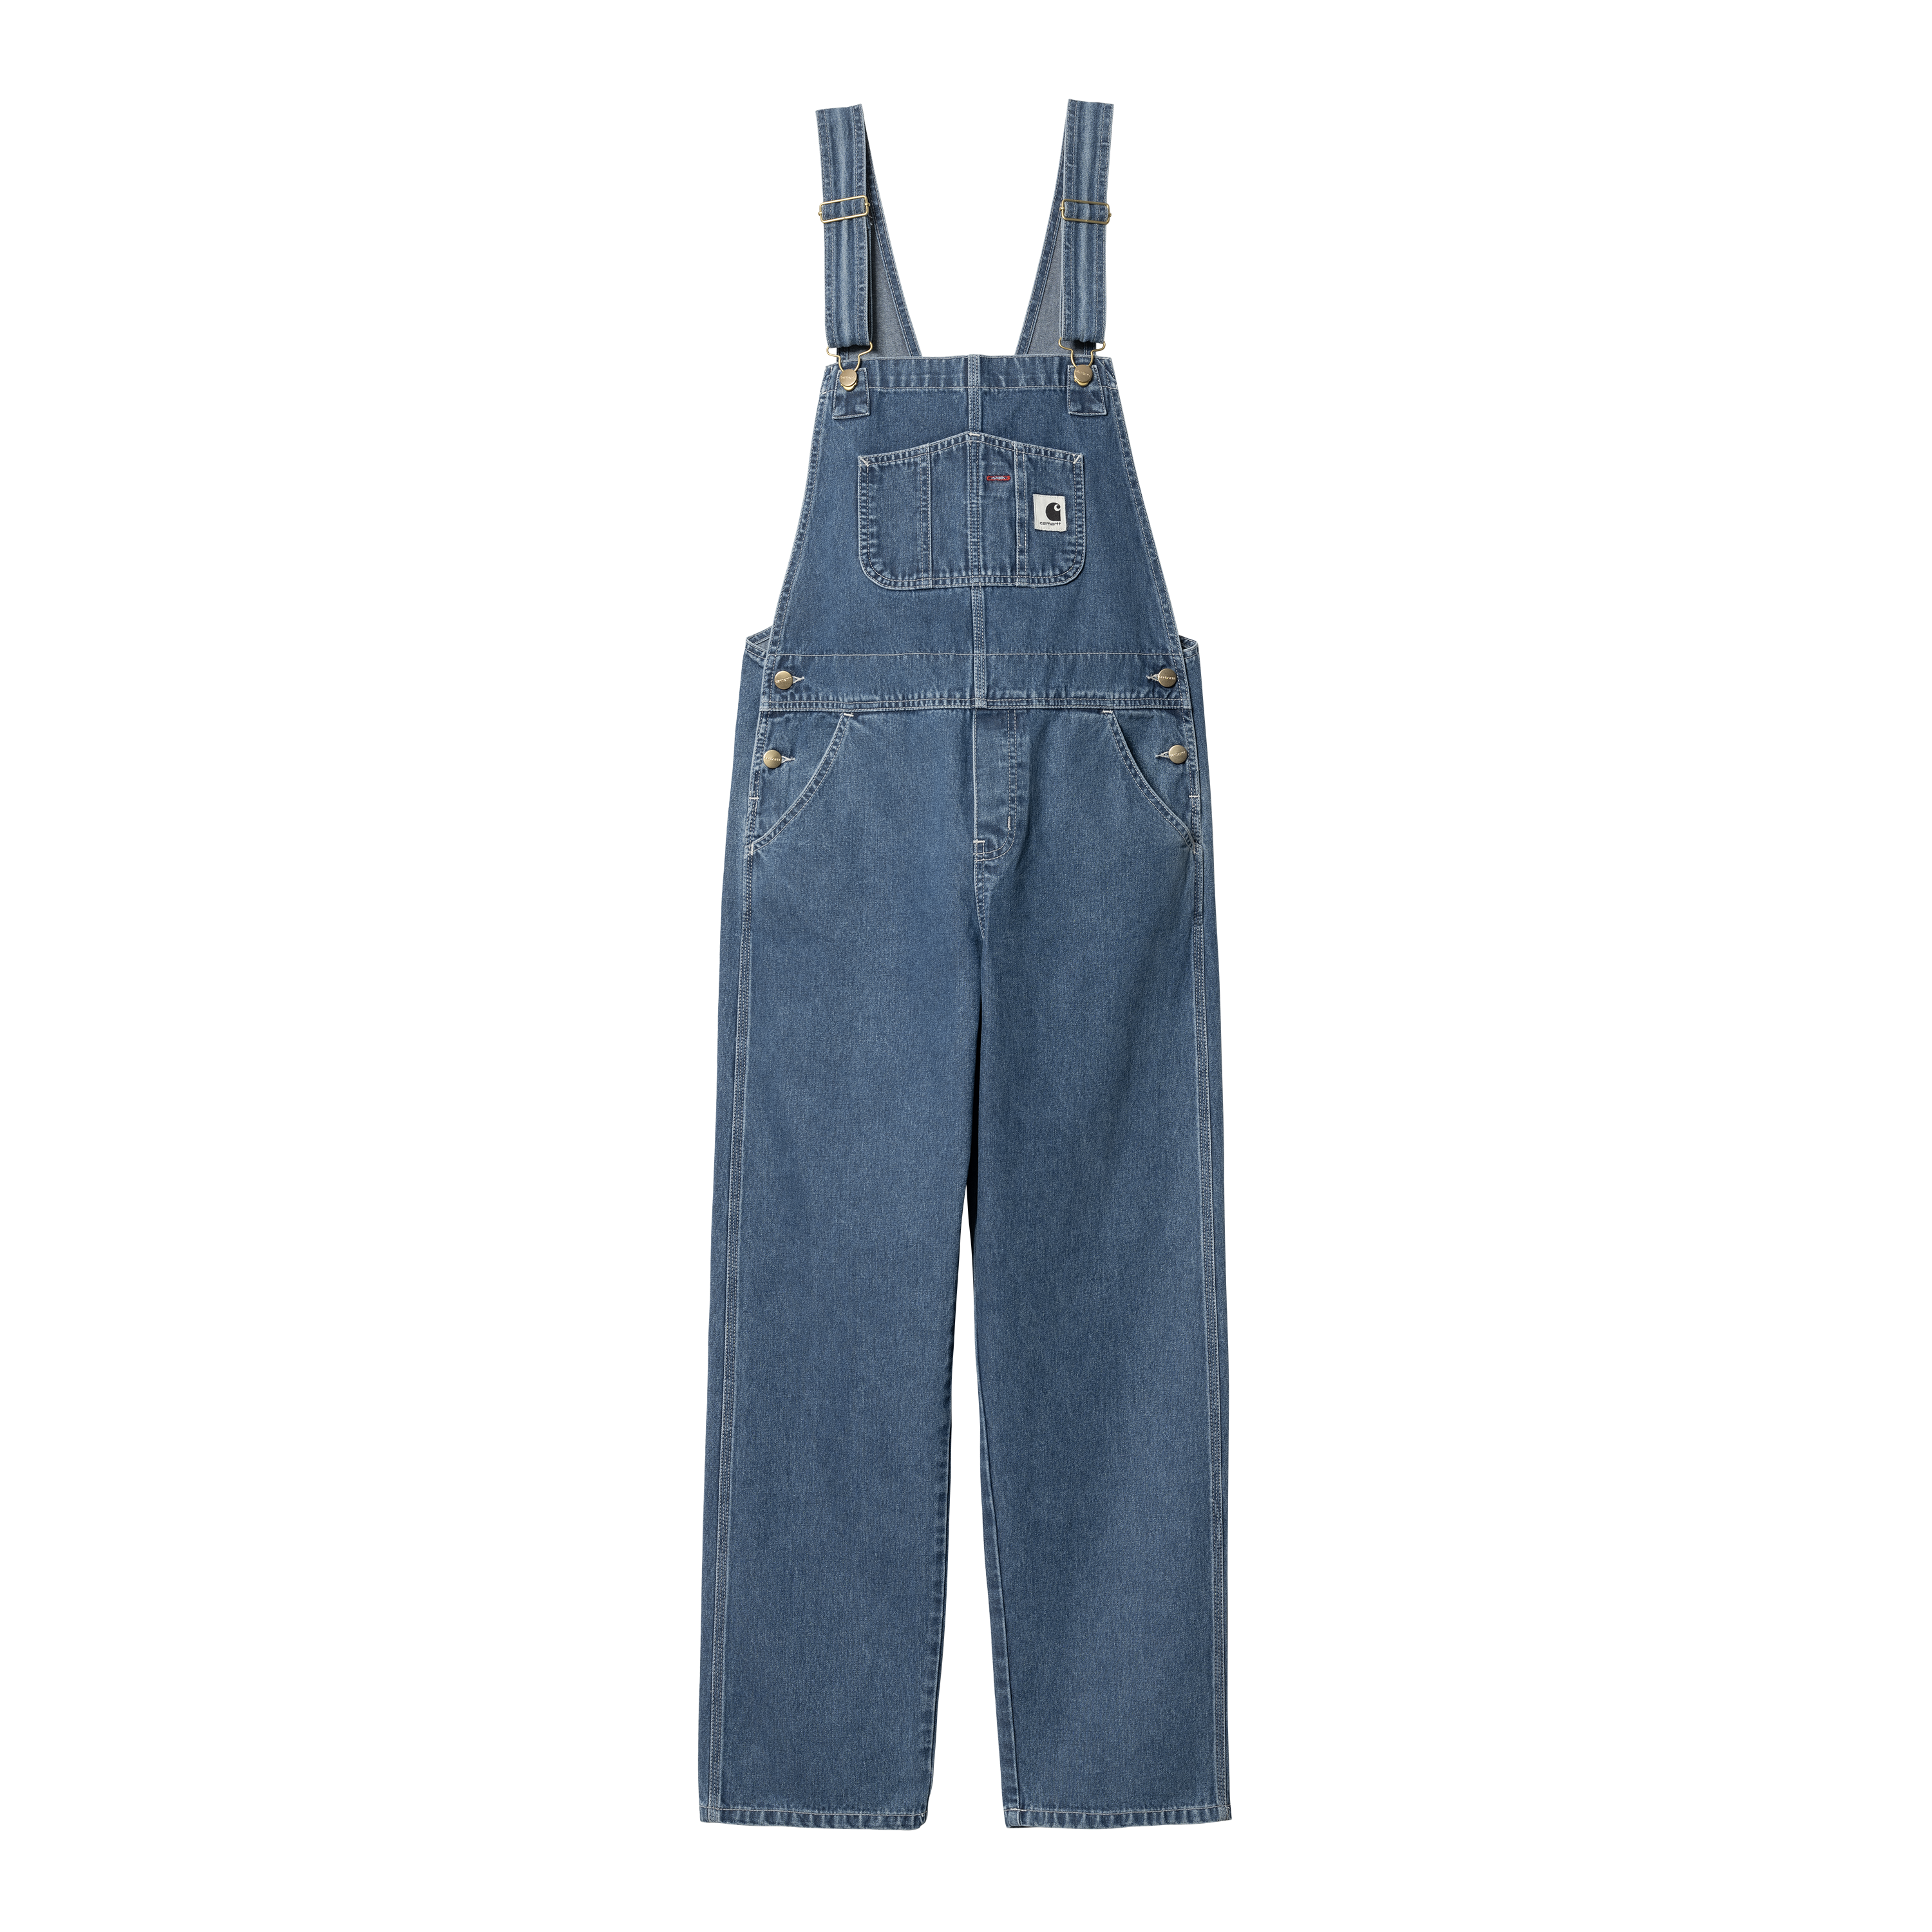 Carhartt Workwear 106002 Womens Relaxed Fit Denim Bib Overall - Clothing  from MI Supplies Limited UK